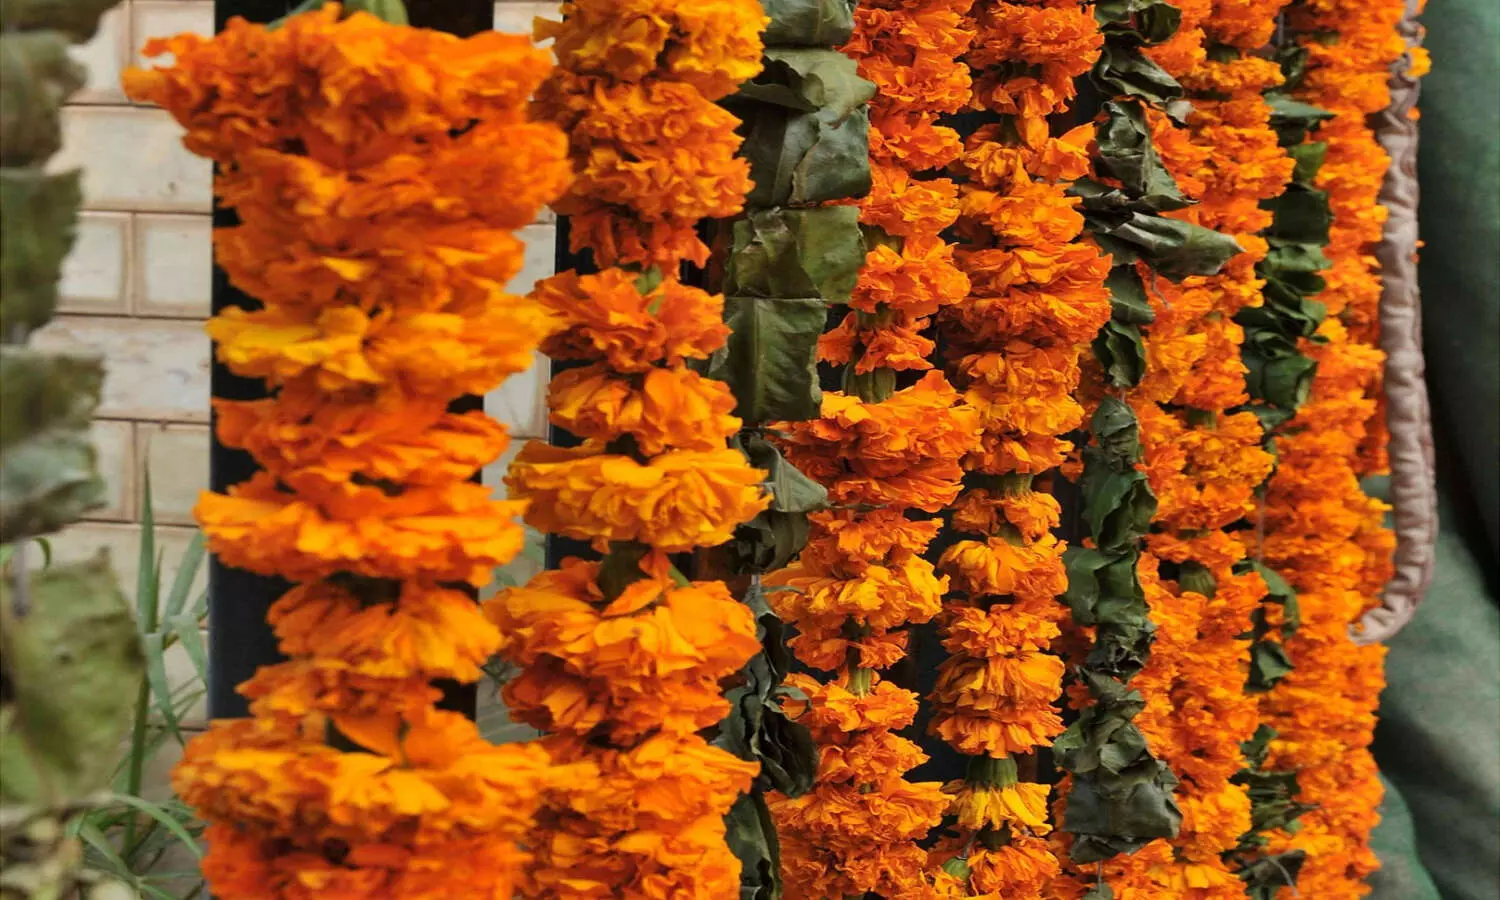 4 creative genda phool décor ideas to make your wedding stand out